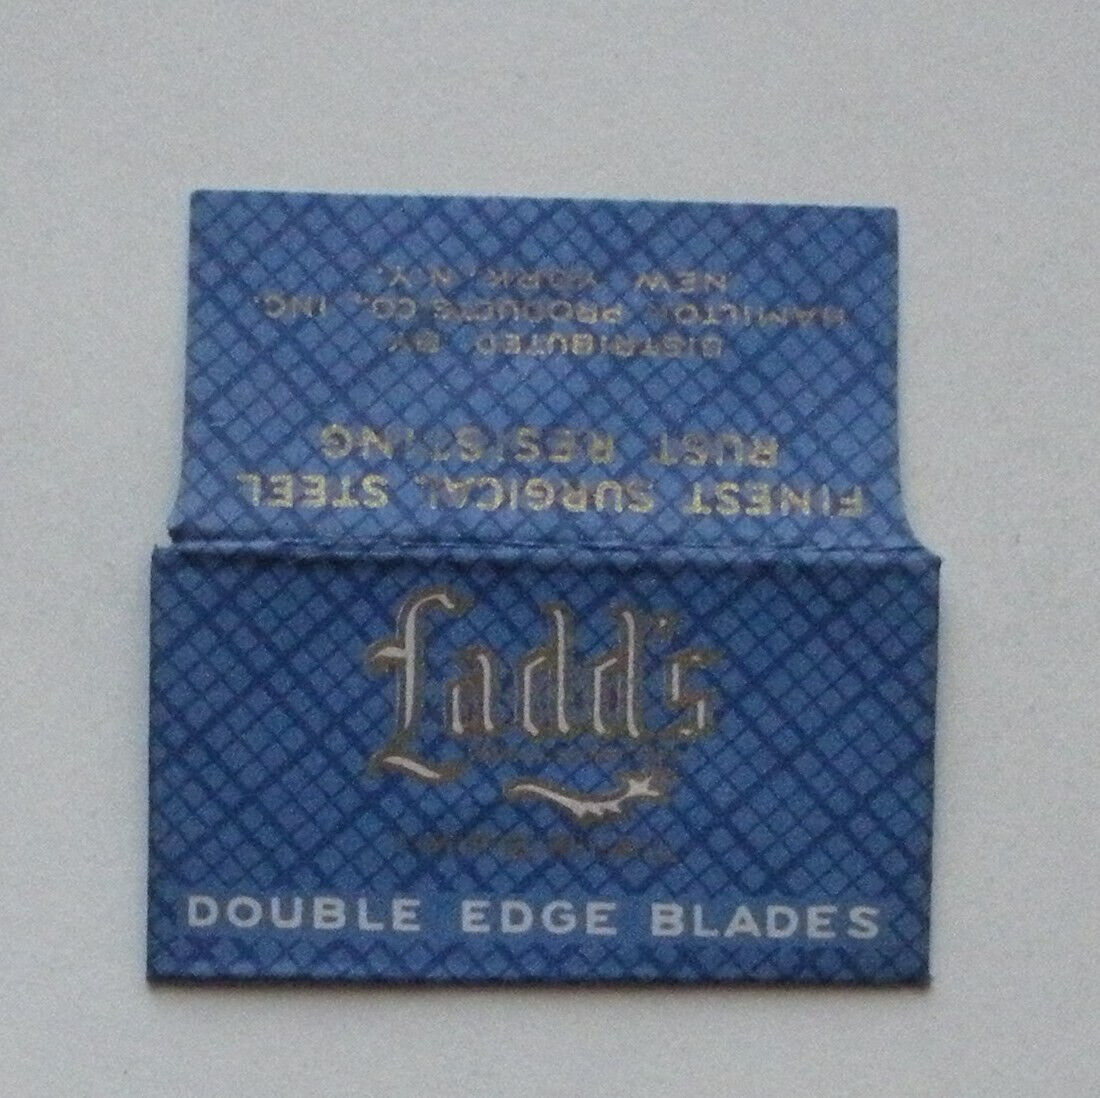 Vintage Razor Blade LADDS - One Wrapped Blade